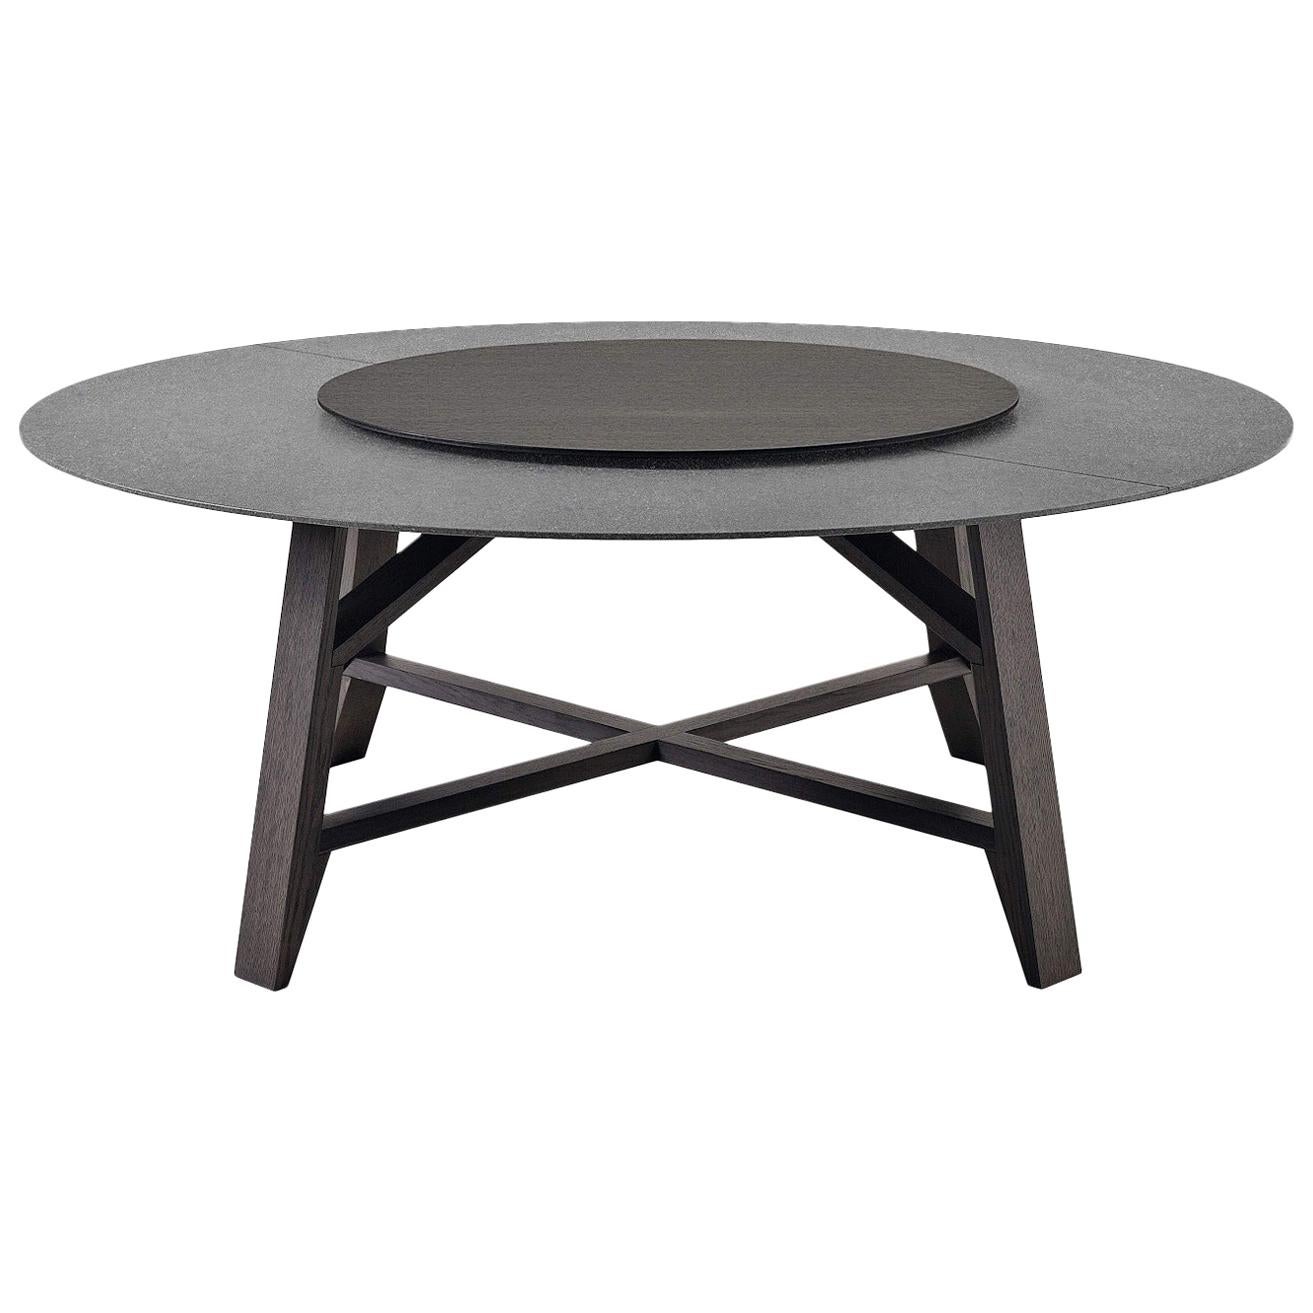 Controvento Table in Charcoal Gray with Revolving Tray by Busnelli im Angebot